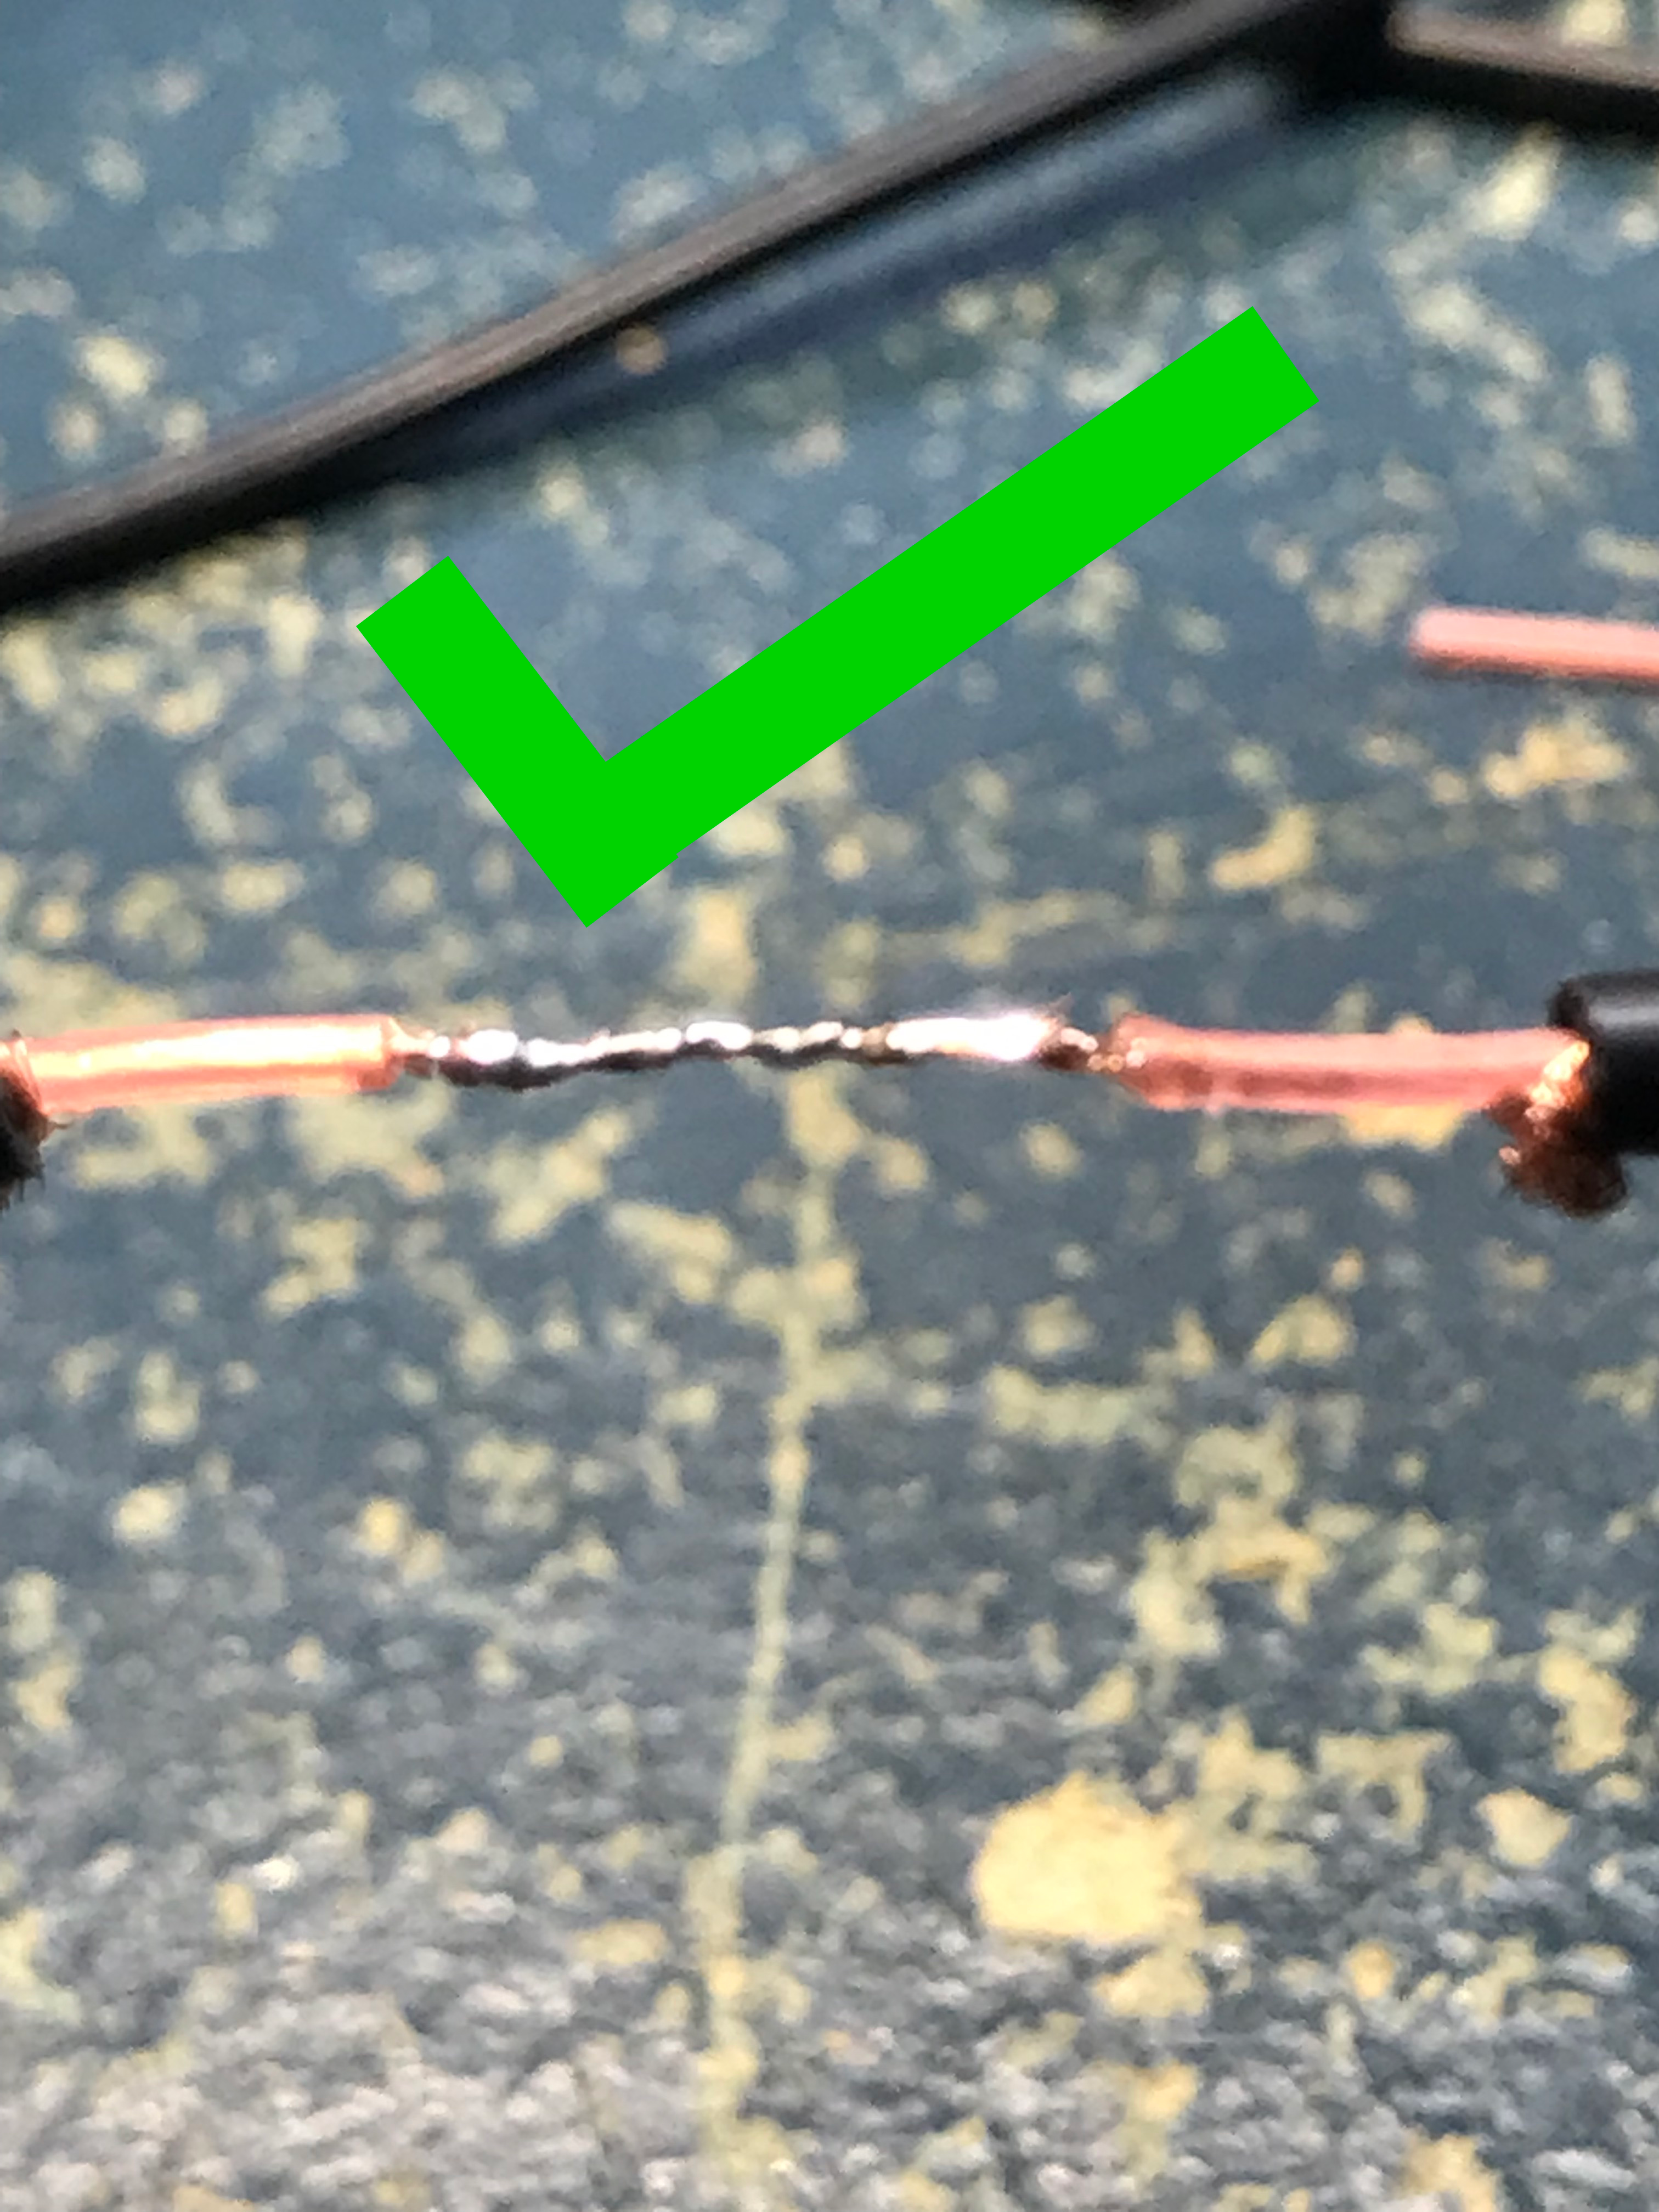 Example of good solder joint